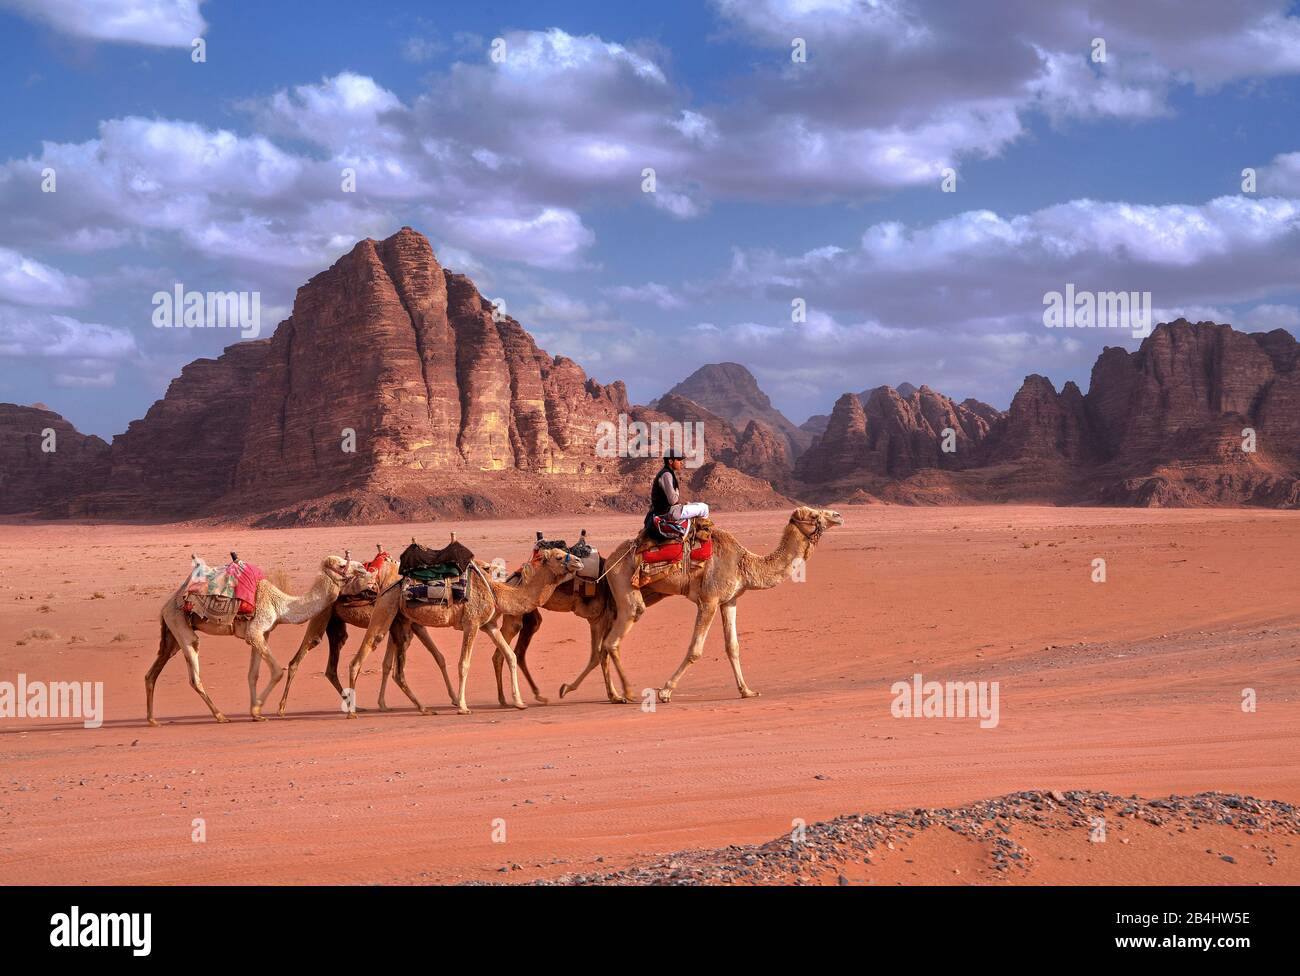 Rock group 'Seven pillars of wisdom' in the landscape of rock and sand desert Wadi Rum with group of camels east of Aqaba Aqaba, Jordan Stock Photo